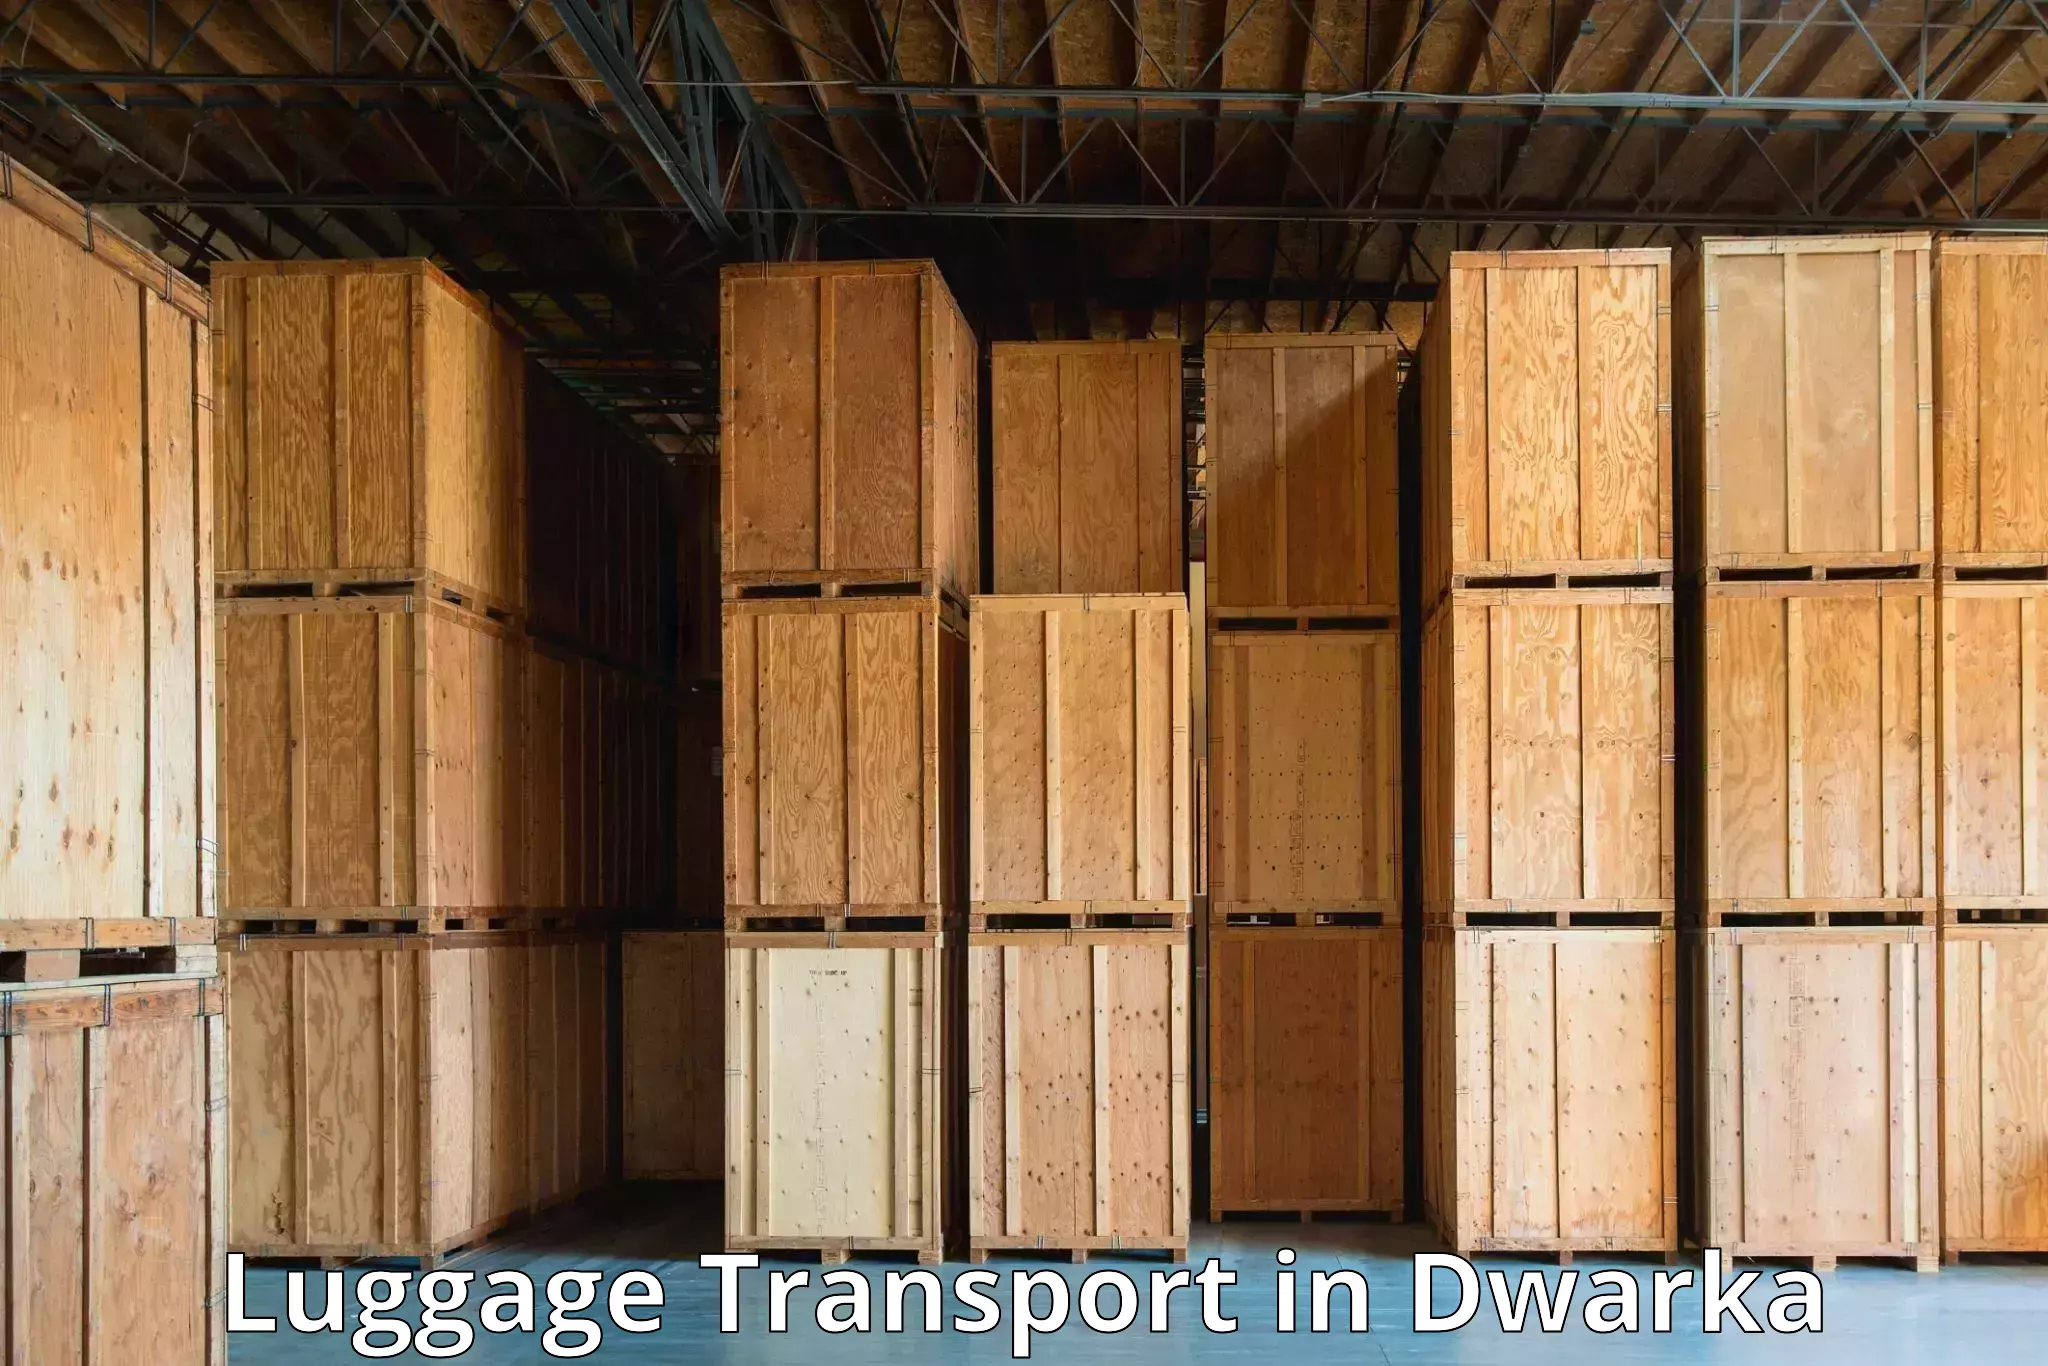 Luggage transport rates in Dwarka